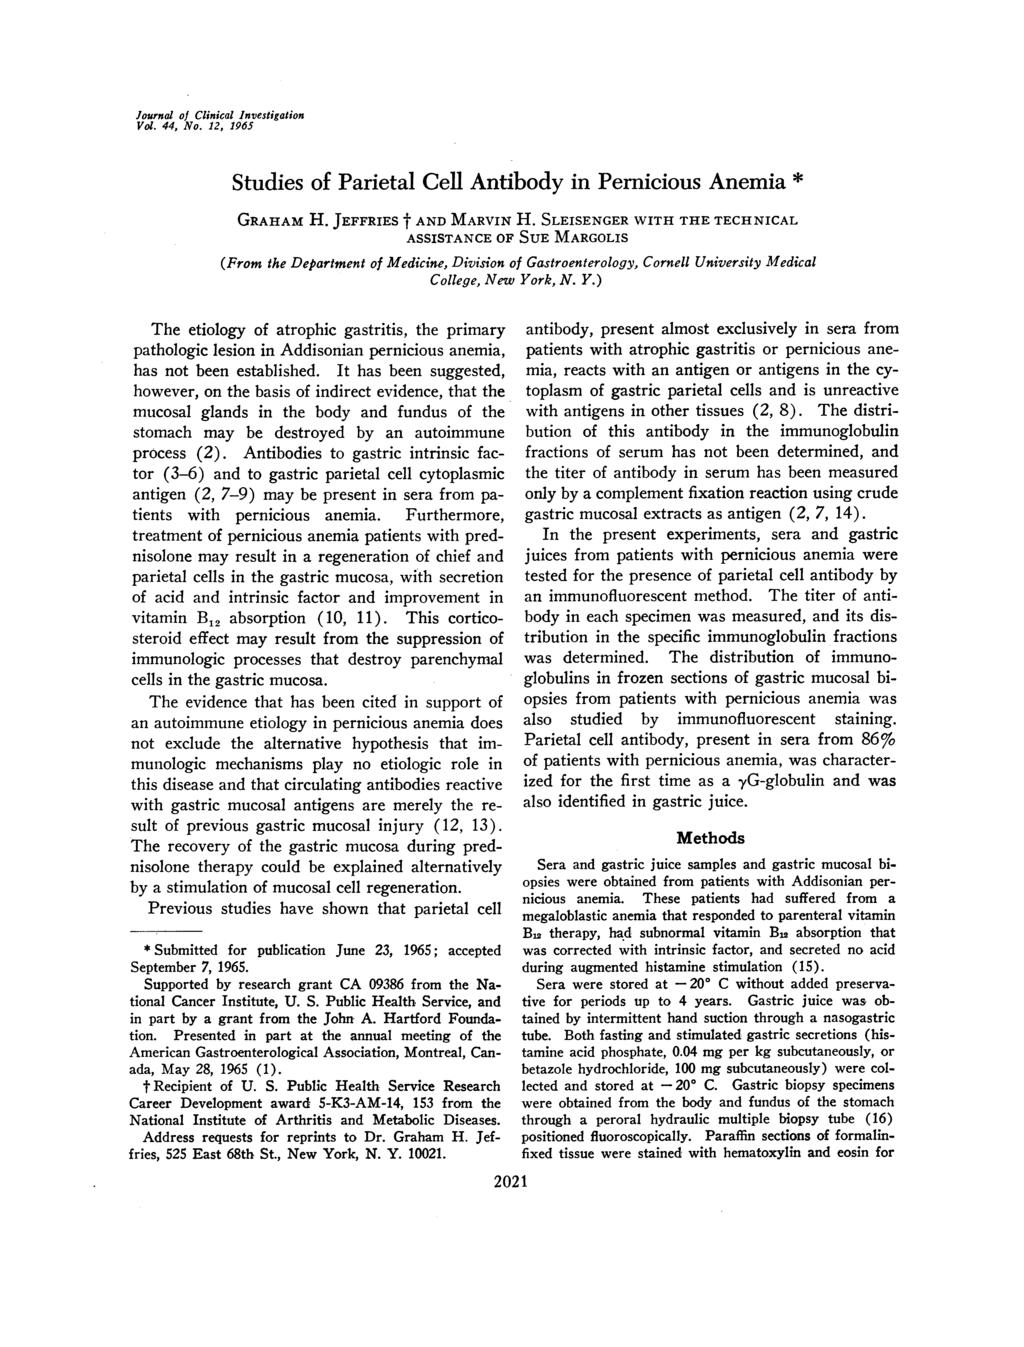 Journal of Clinical Investigation Vol. 44, No. 12, 1965 Studies of Parietal Cell Antibody in Pernicious Anemia * GRAHAM H. JEFFRIES t AND MARVIN H.